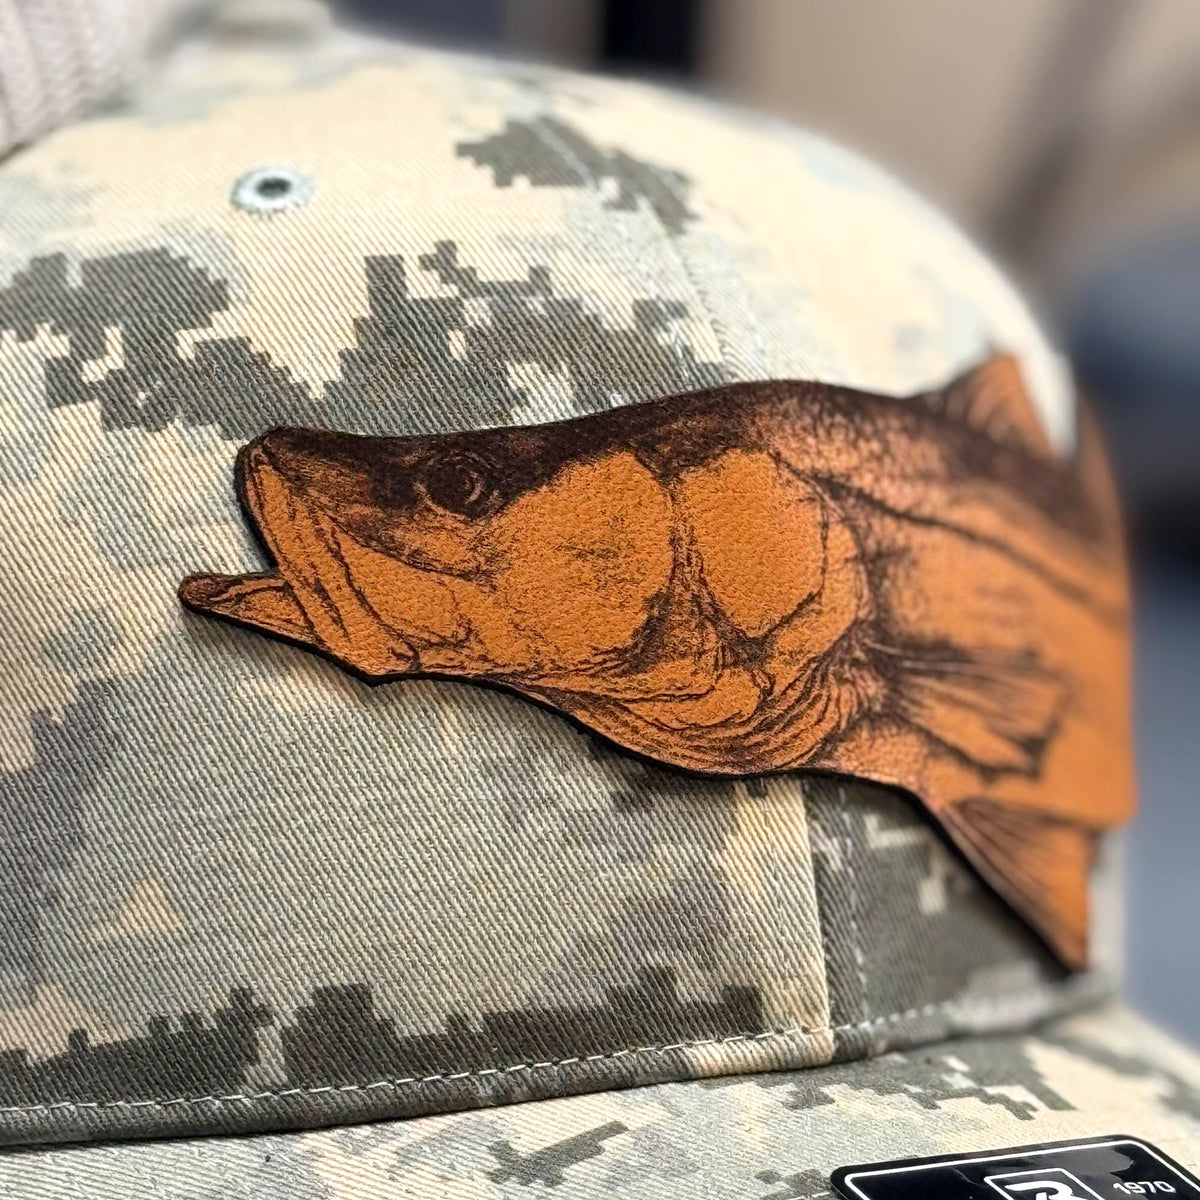 Photo of a Richardson 112 trucker hat in digital khaki camo colorway featuring a detailed leather patch of a snook, ideal for recreational saltwater fishermen seeking themed and functional headwear for their fishing trips.